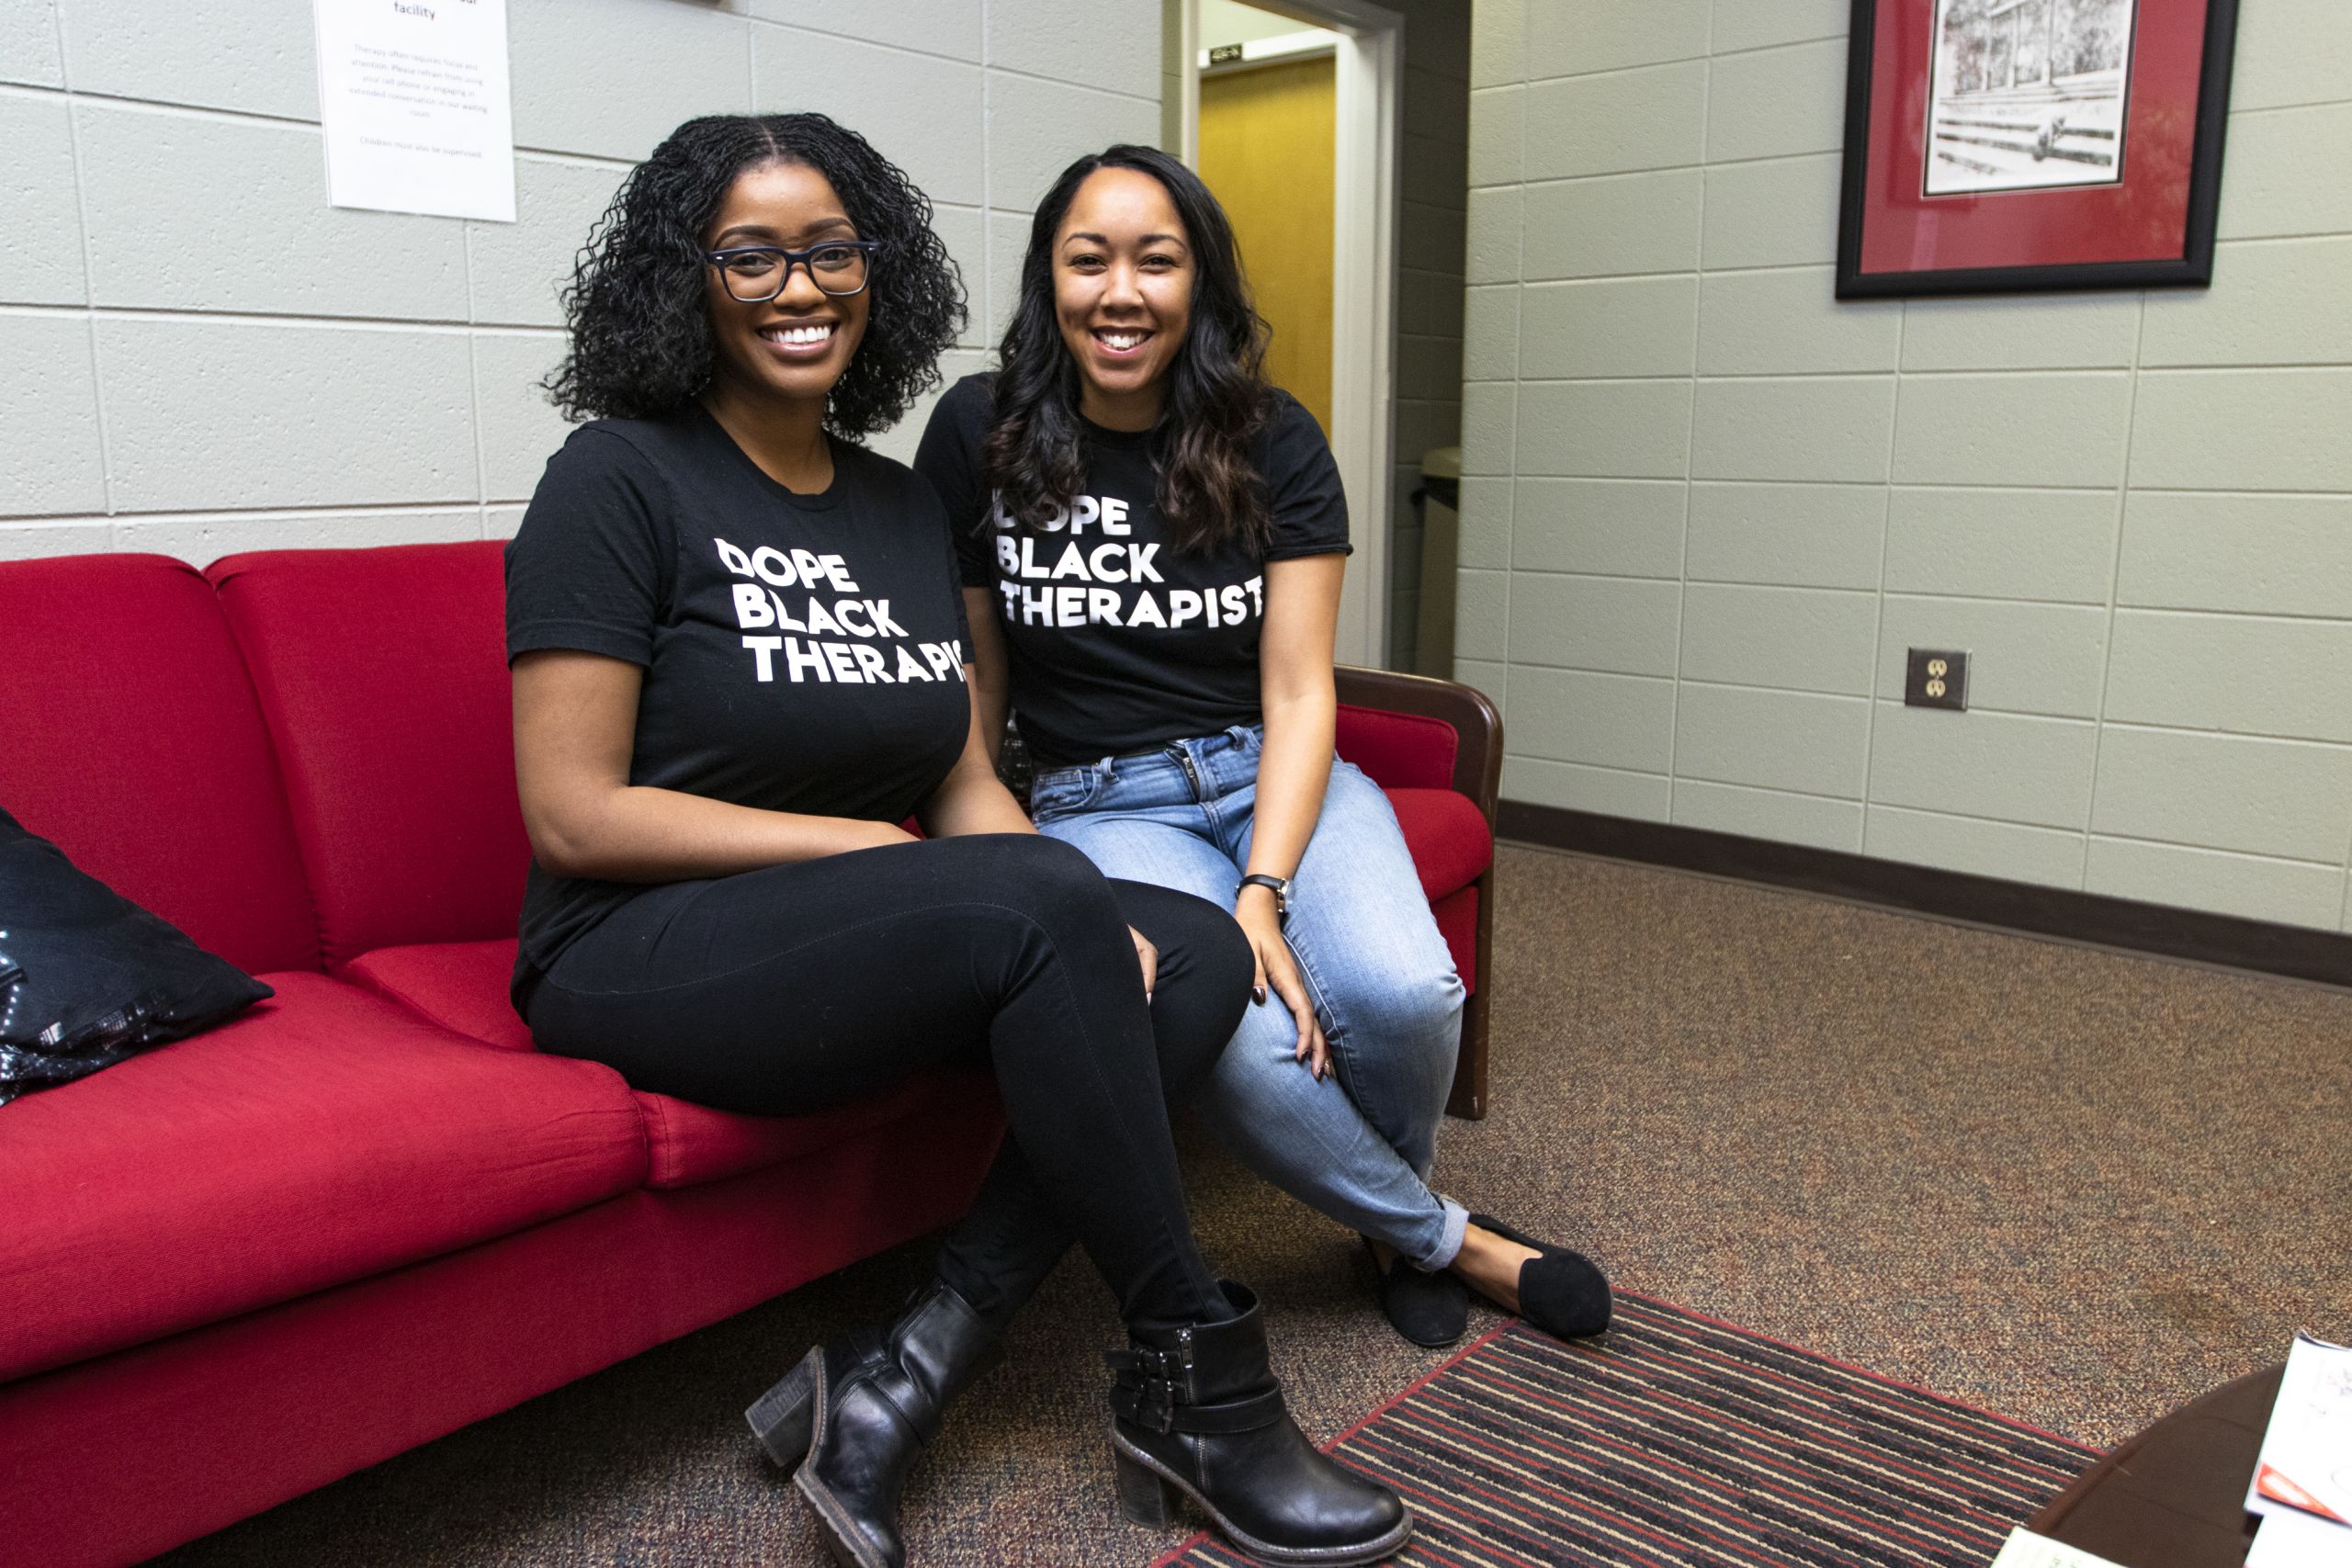 Shawntell Pace and Tanisha Pelham provide weekly support for black women on UGA’s campus through The Healing Circle, a group Pace founded last year